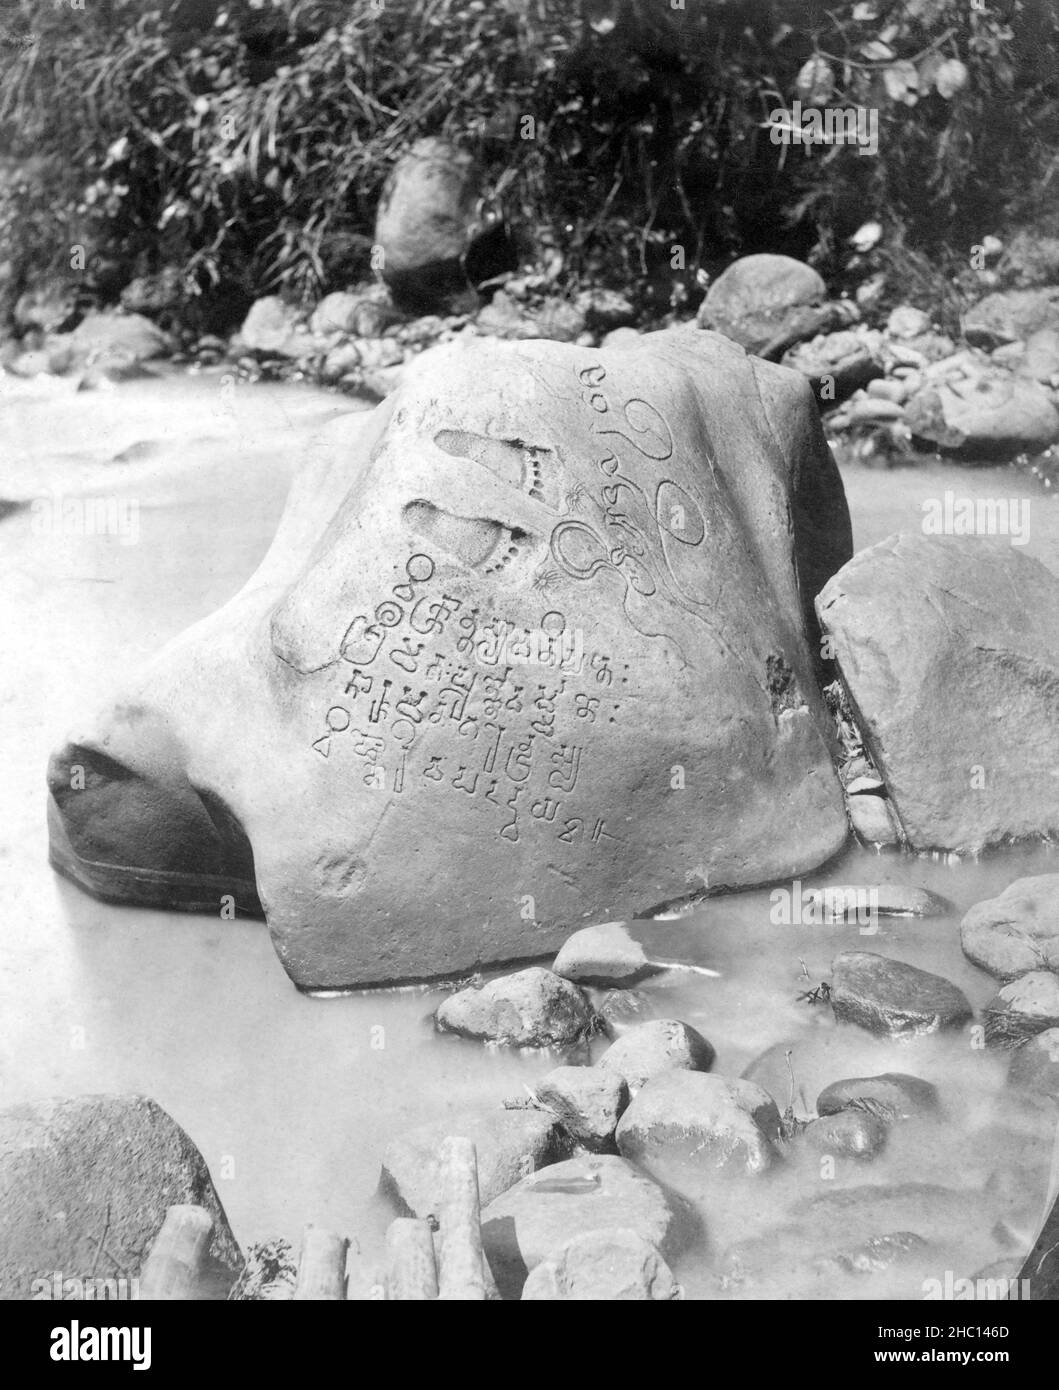 Indonesia: The 5th century Ciaruteun inscription stone, Ciaruteun River, Cibungbulang District, Bogor Regency, West Java. Photo by Isidore van Kinsbergen (1821 - 1905), late 19th century. The Ciaruteun inscription, also written Ciarutön or also known as Ciampea inscription is a 5th-century stone inscription discovered on the riverbed of Ciaruteun River, a tributary of Cisadane River, not far from Bogor, West Java, Indonesia. The inscription is dated from the Tarumanagara kingdom period, one of the earliest Hindu kingdoms in Indonesian history. Stock Photo